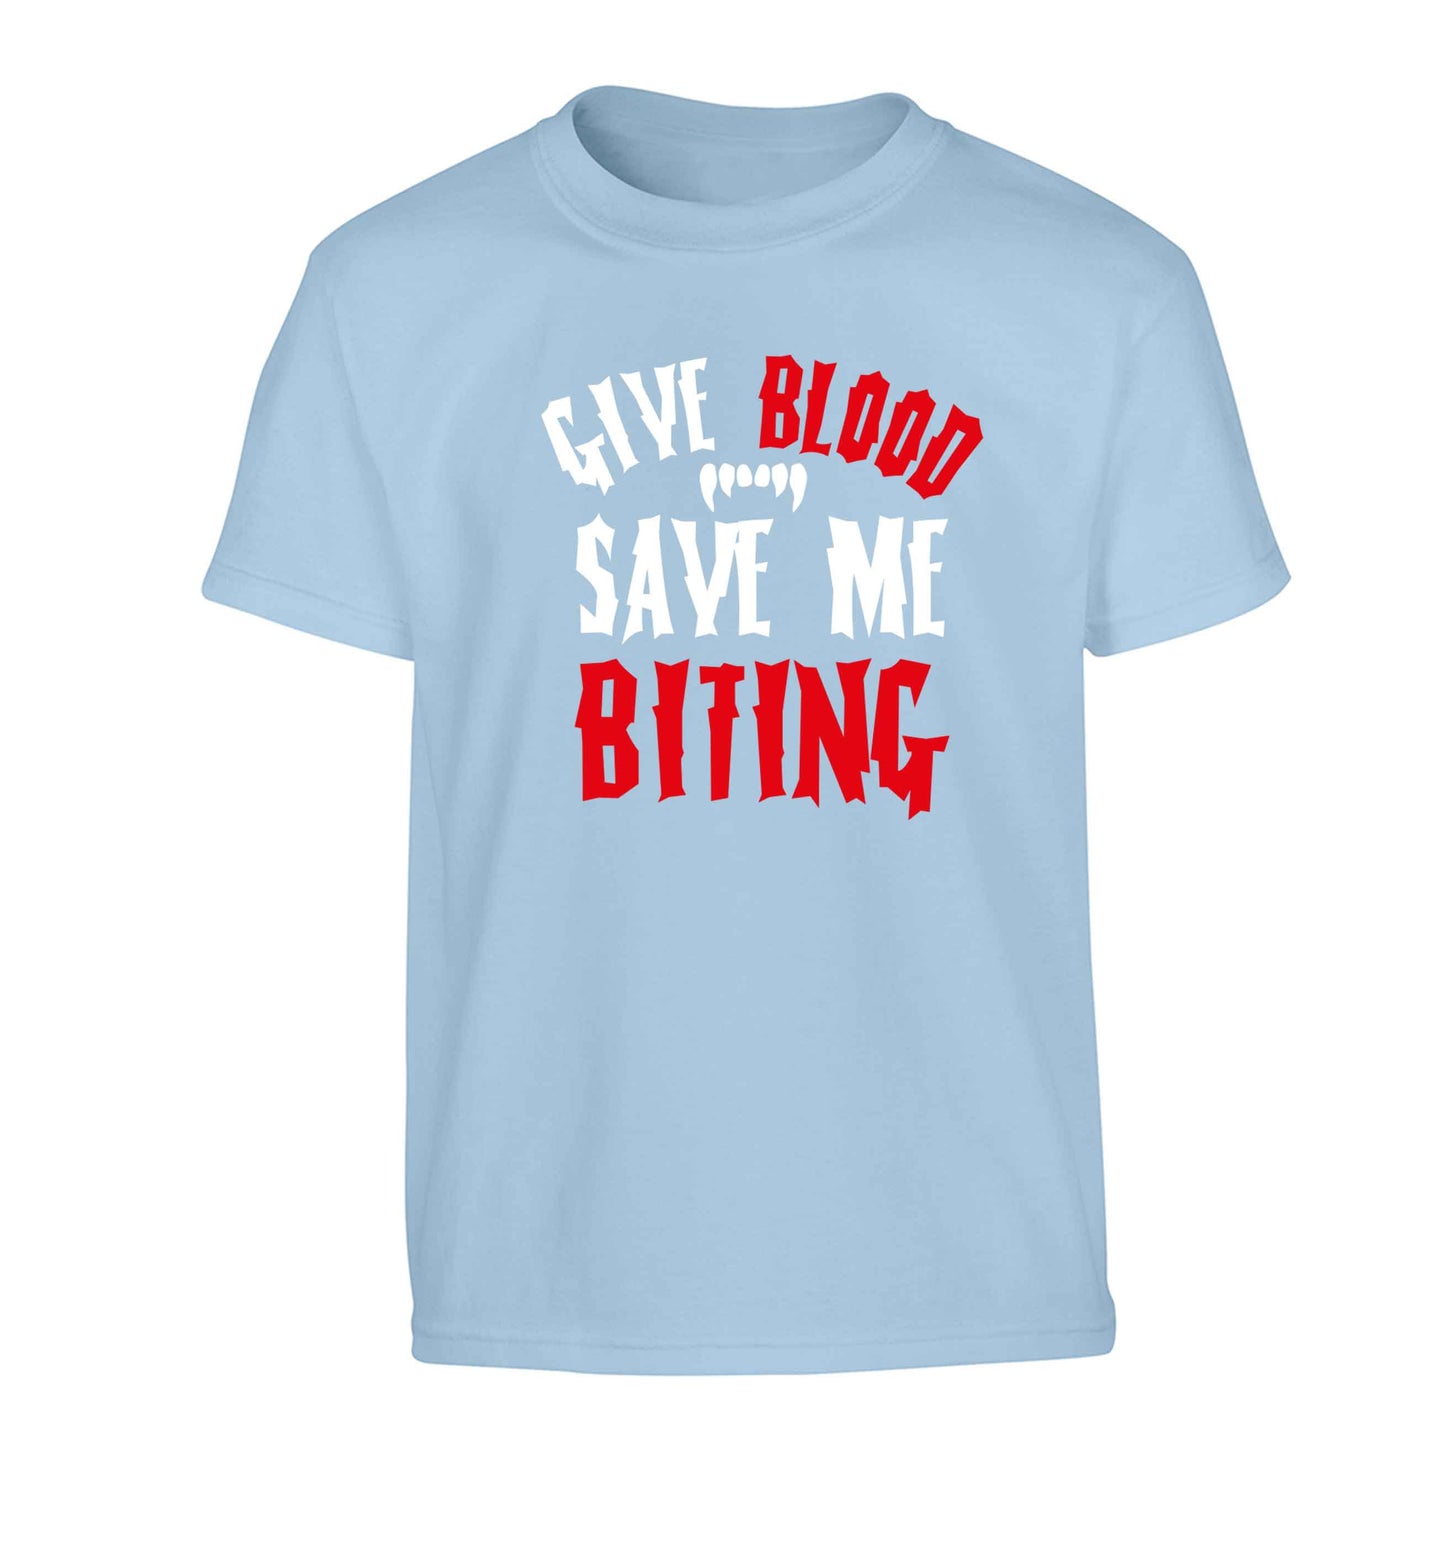 Give blood save me biting Children's light blue Tshirt 12-13 Years